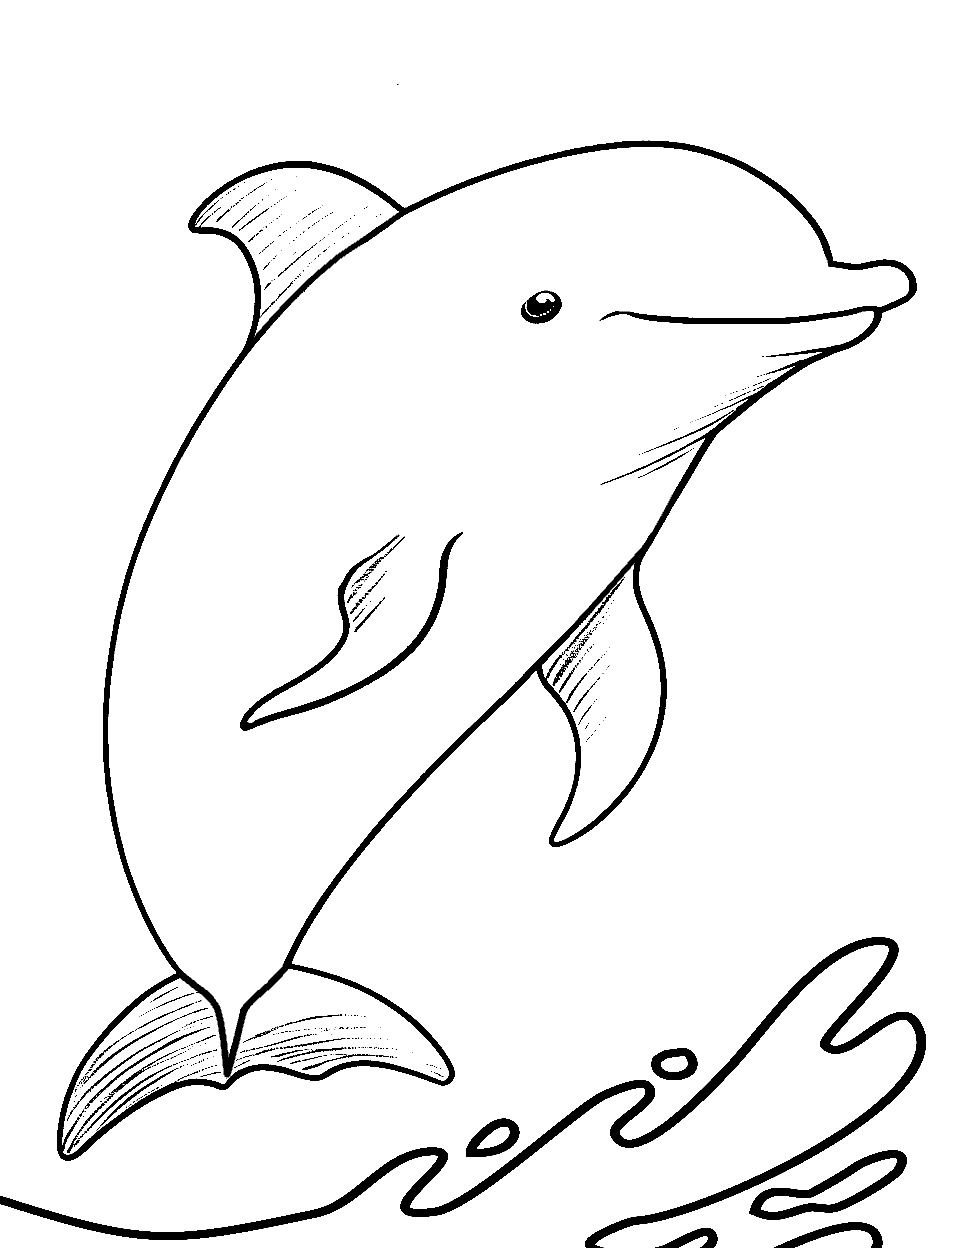 Bottlenose Dolphin Portrait Coloring Page - A detailed close-up of a bottlenose dolphin’s face, exuding warmth and friendliness.